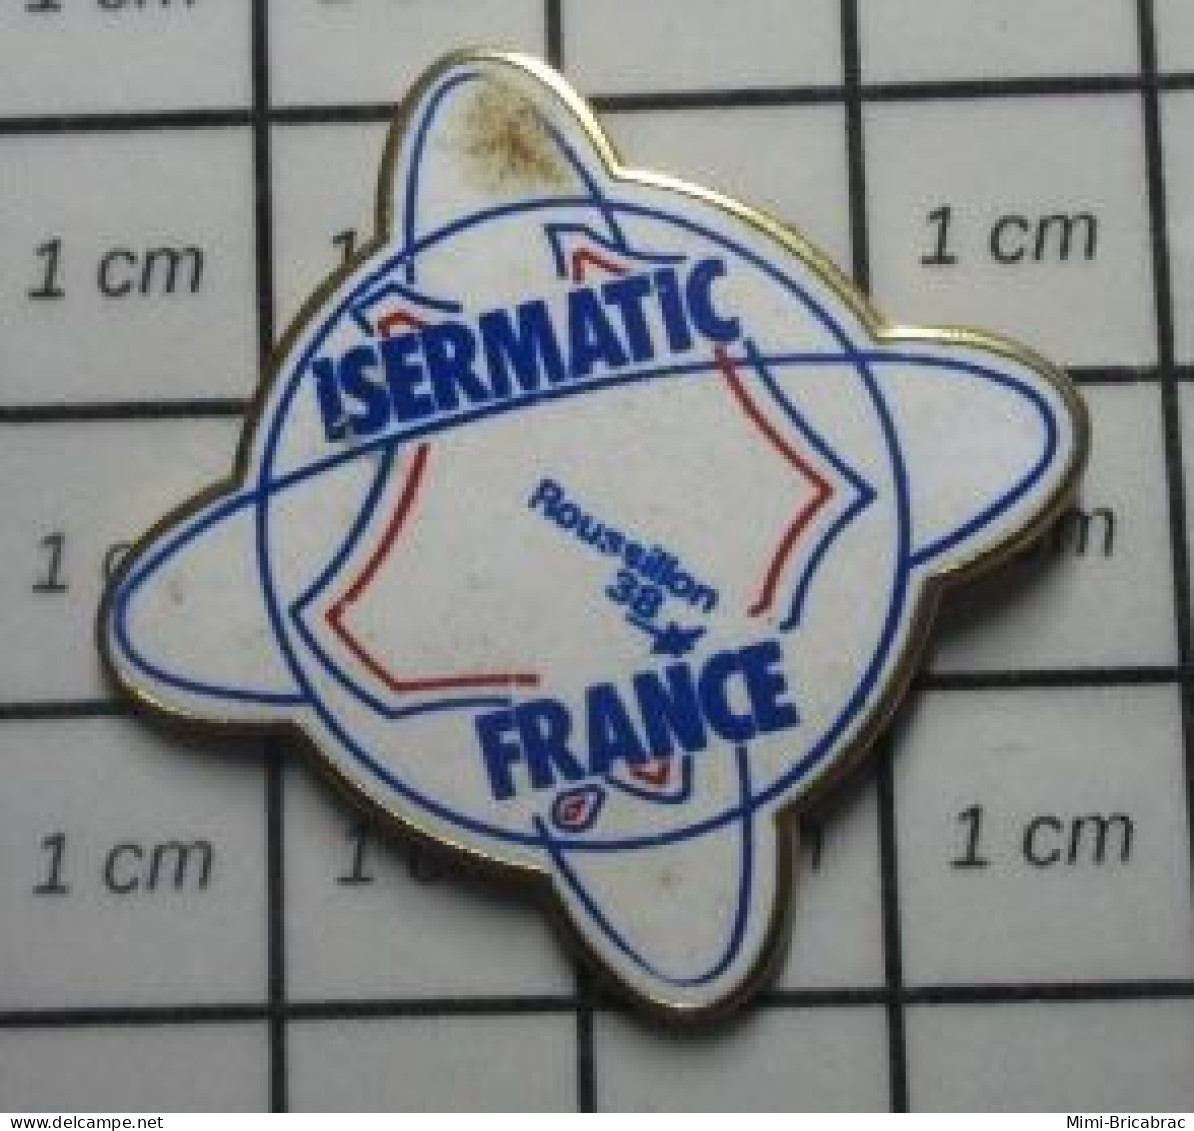 SP12 Pin's Pins / Beau Et Rare / MARQUES / ISERMATIC FRANCE ROUSSILLON - Trademarks